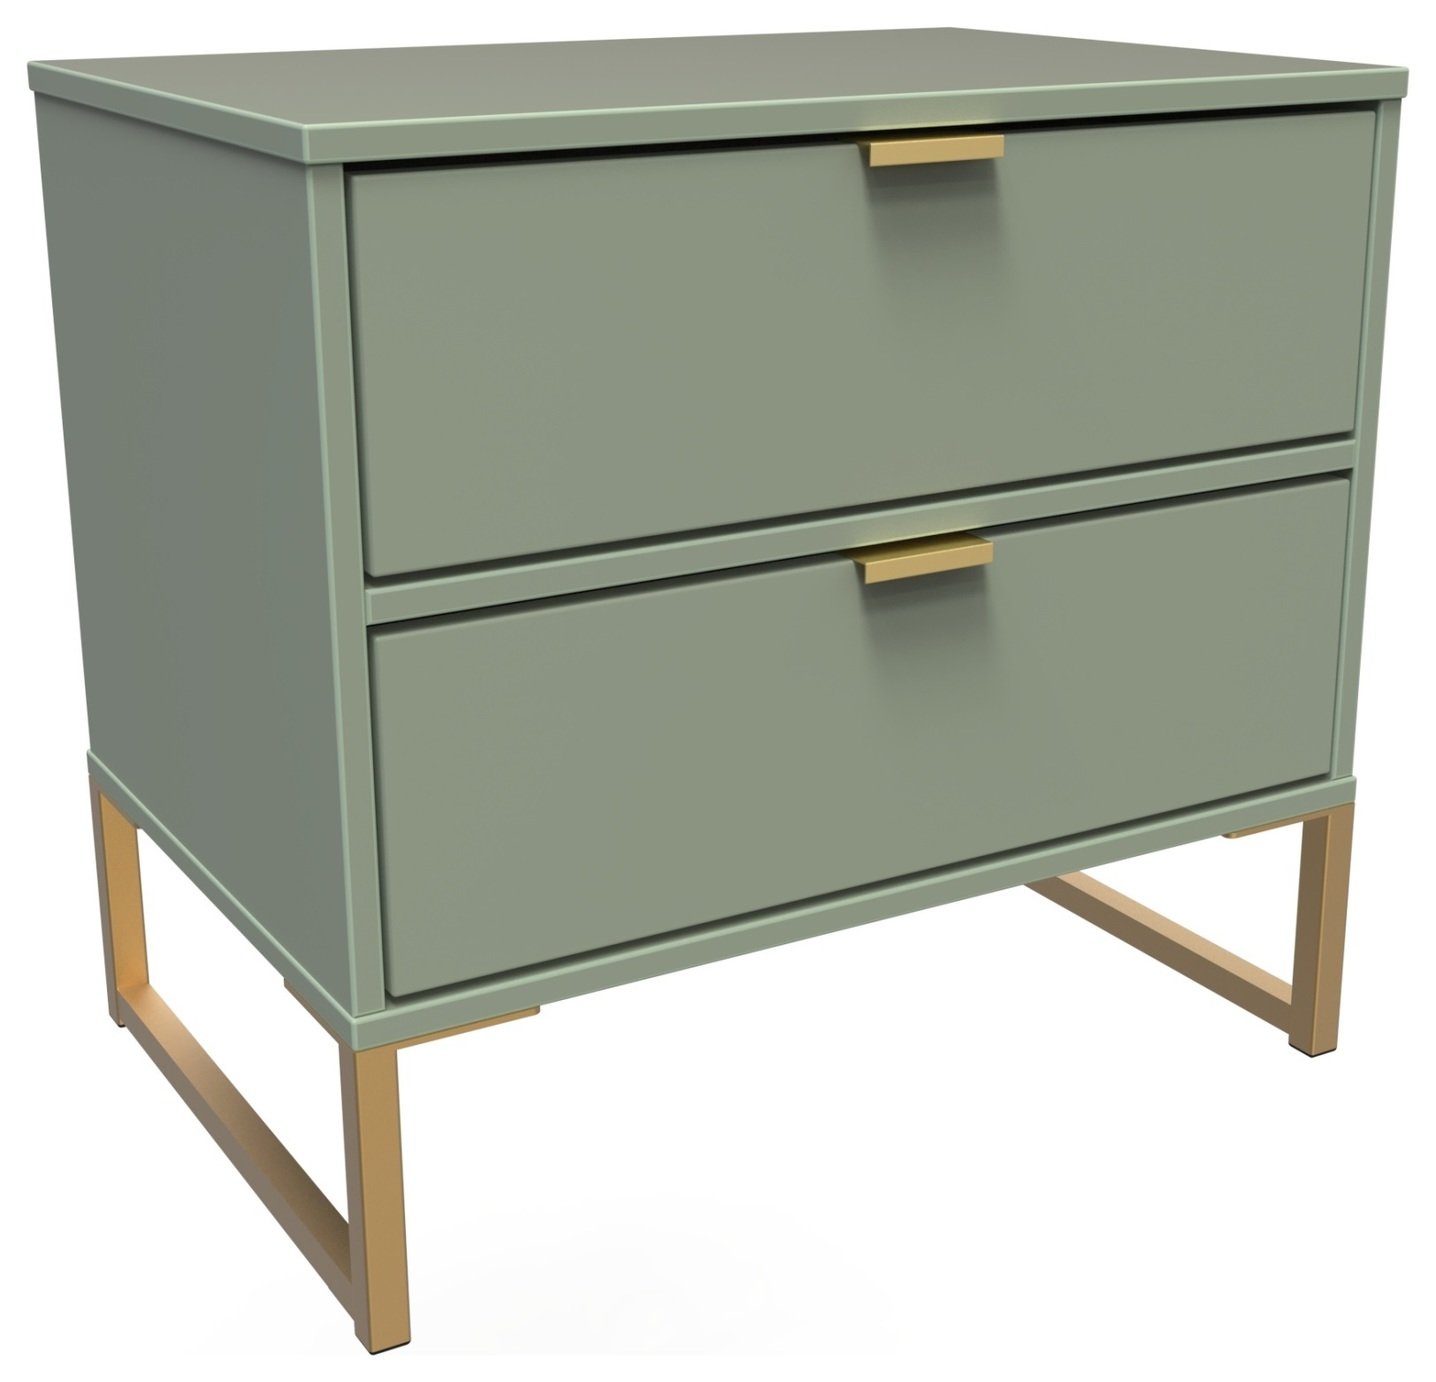 Messina 2 Drawer Bedside Table - Green